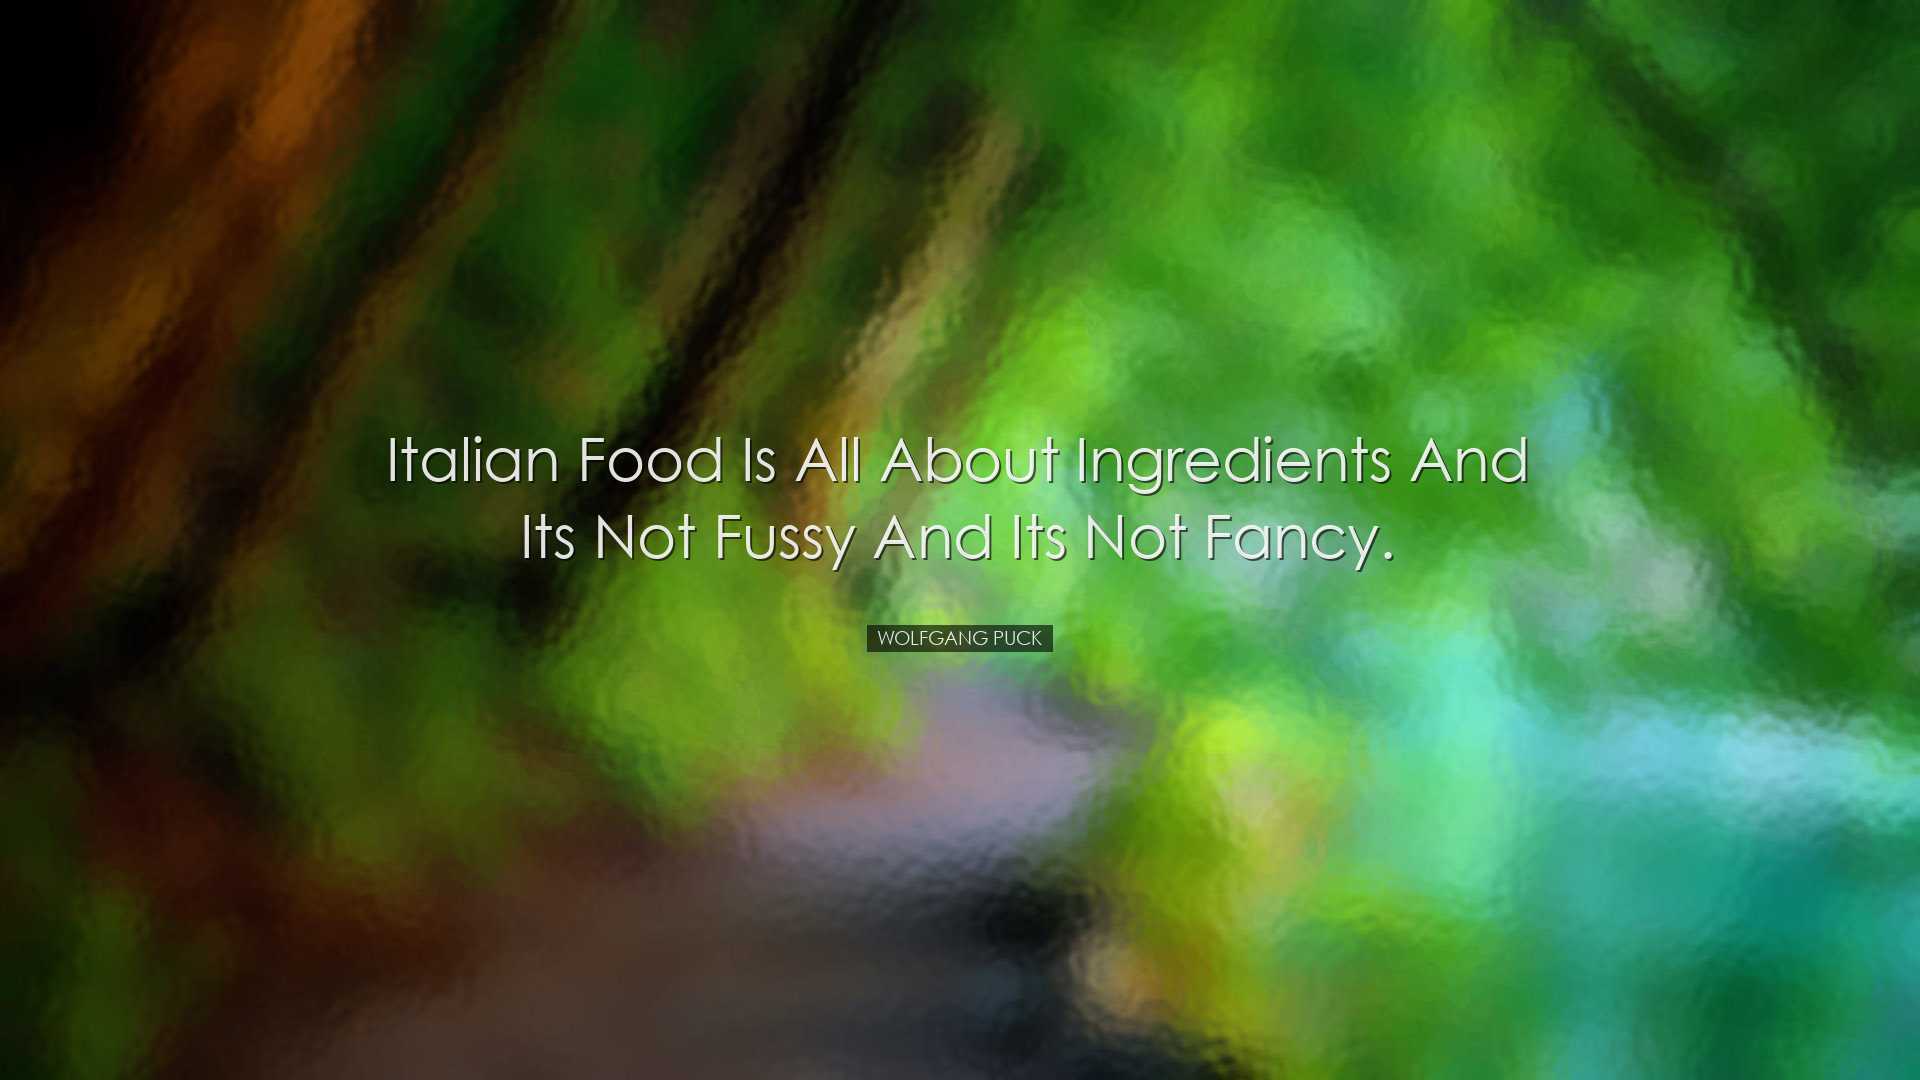 Italian food is all about ingredients and its not fussy and its no